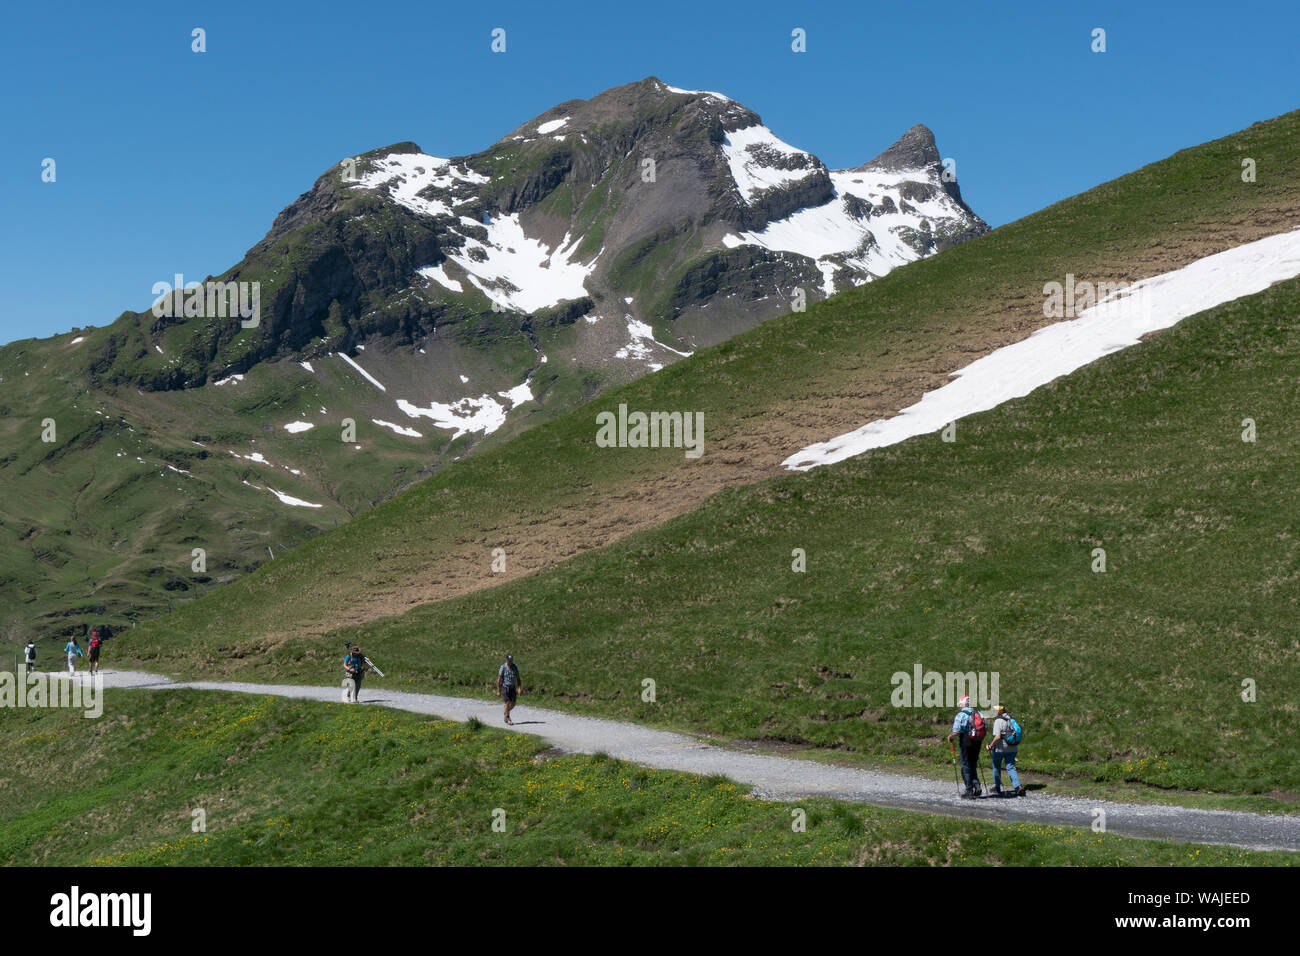 Switzerland, Bernese Oberland. Hikers walking the path to Bachalpsee on a sunny day. (Editorial Use Only) Stock Photo